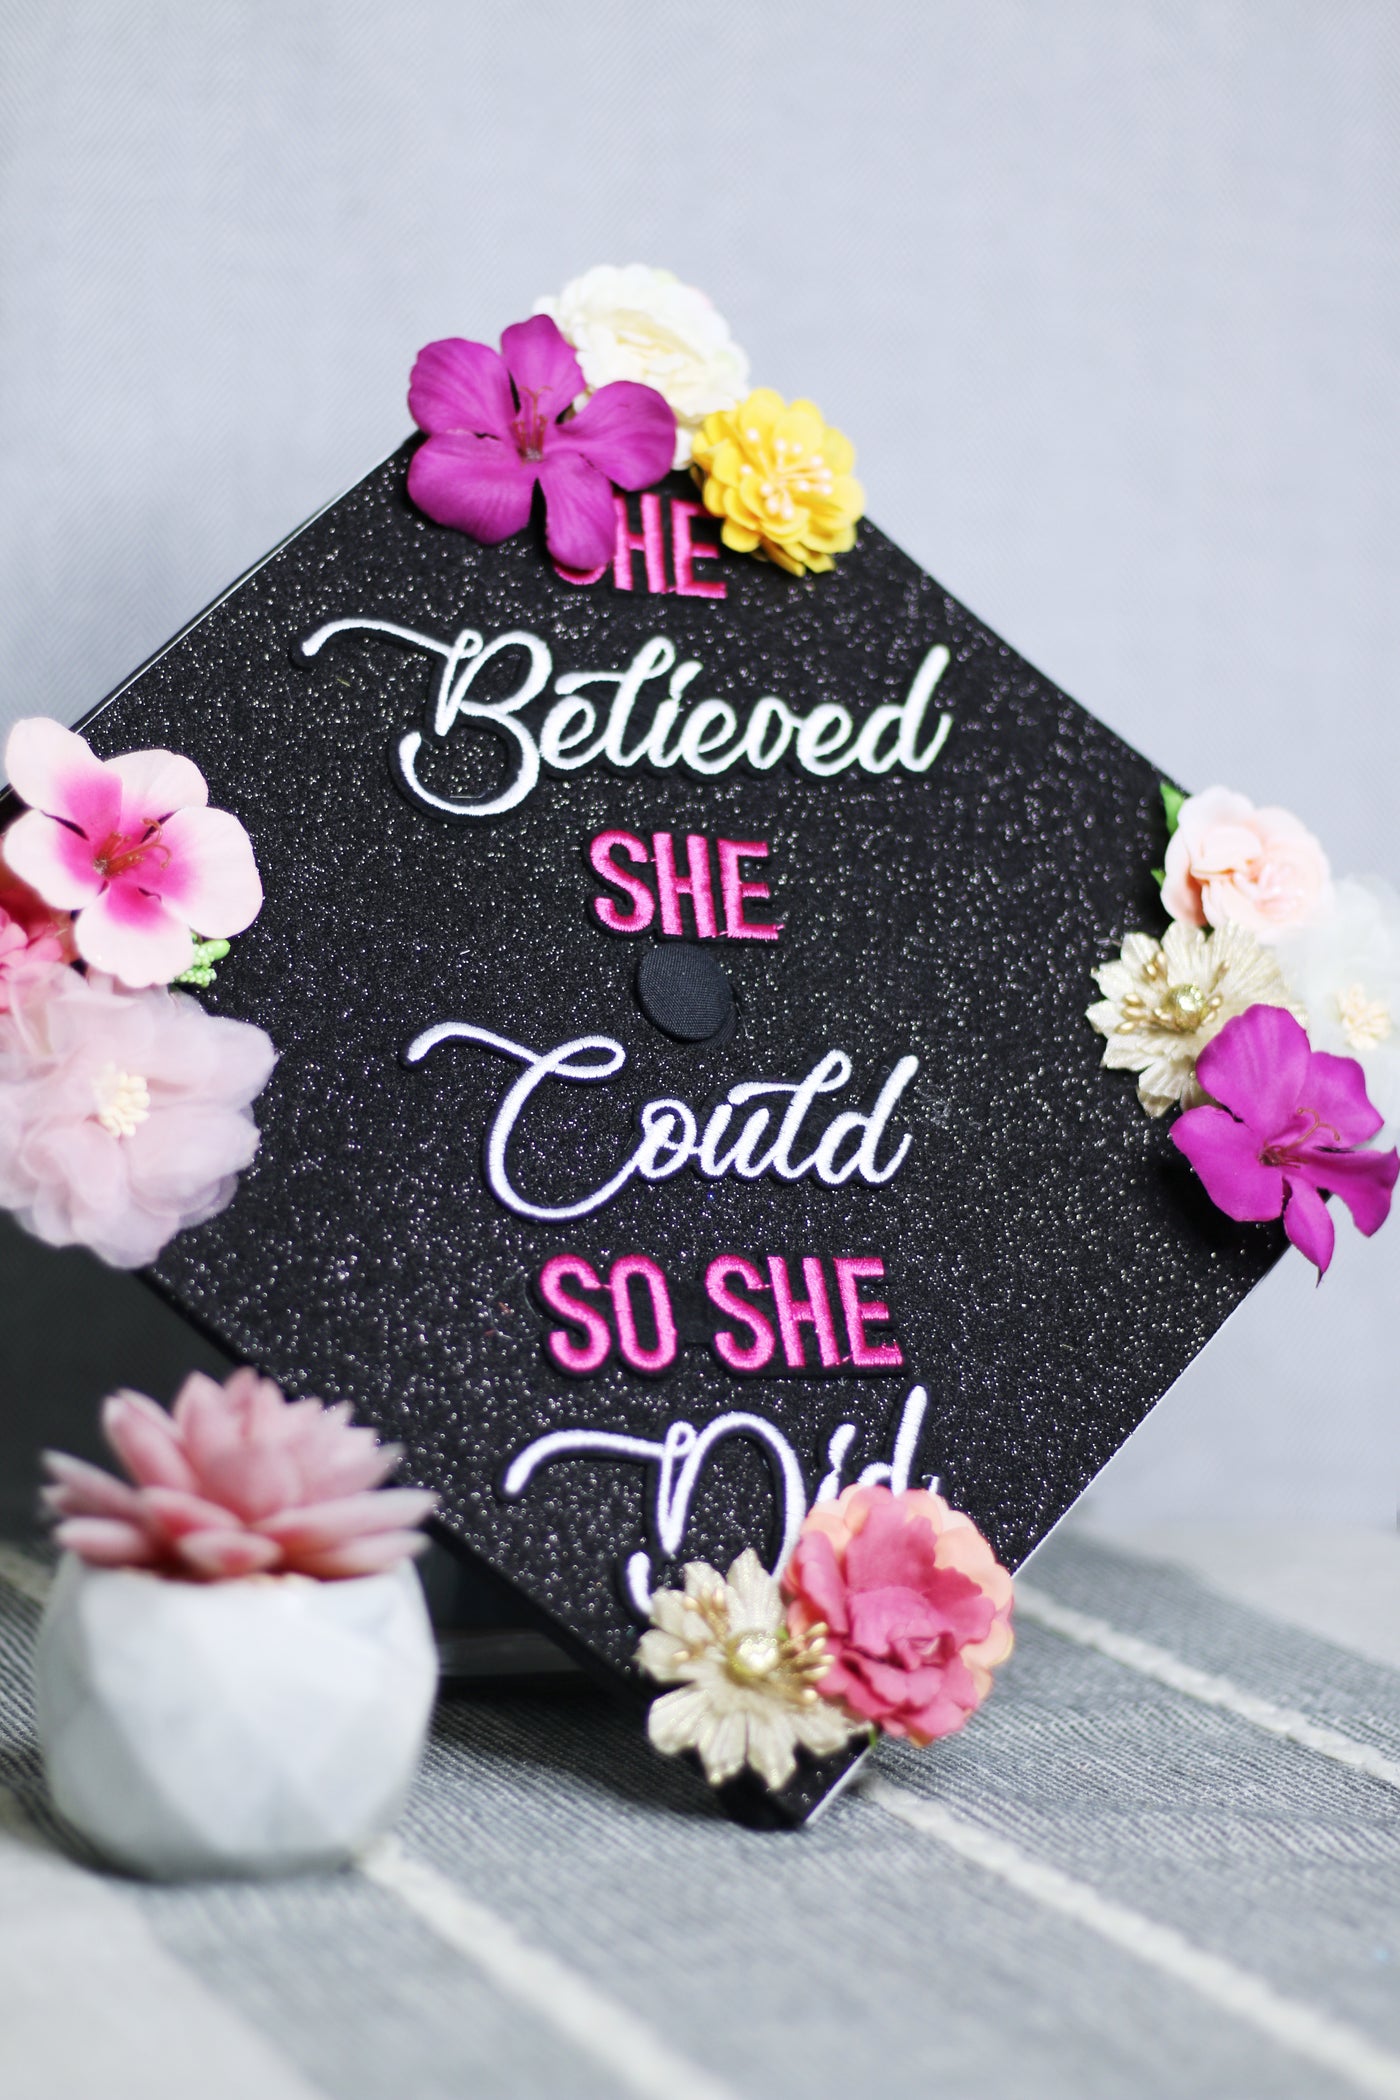 Handmade Graduation Cap Topper, Graduation Cap Decorations, She Believe She Could So She Did